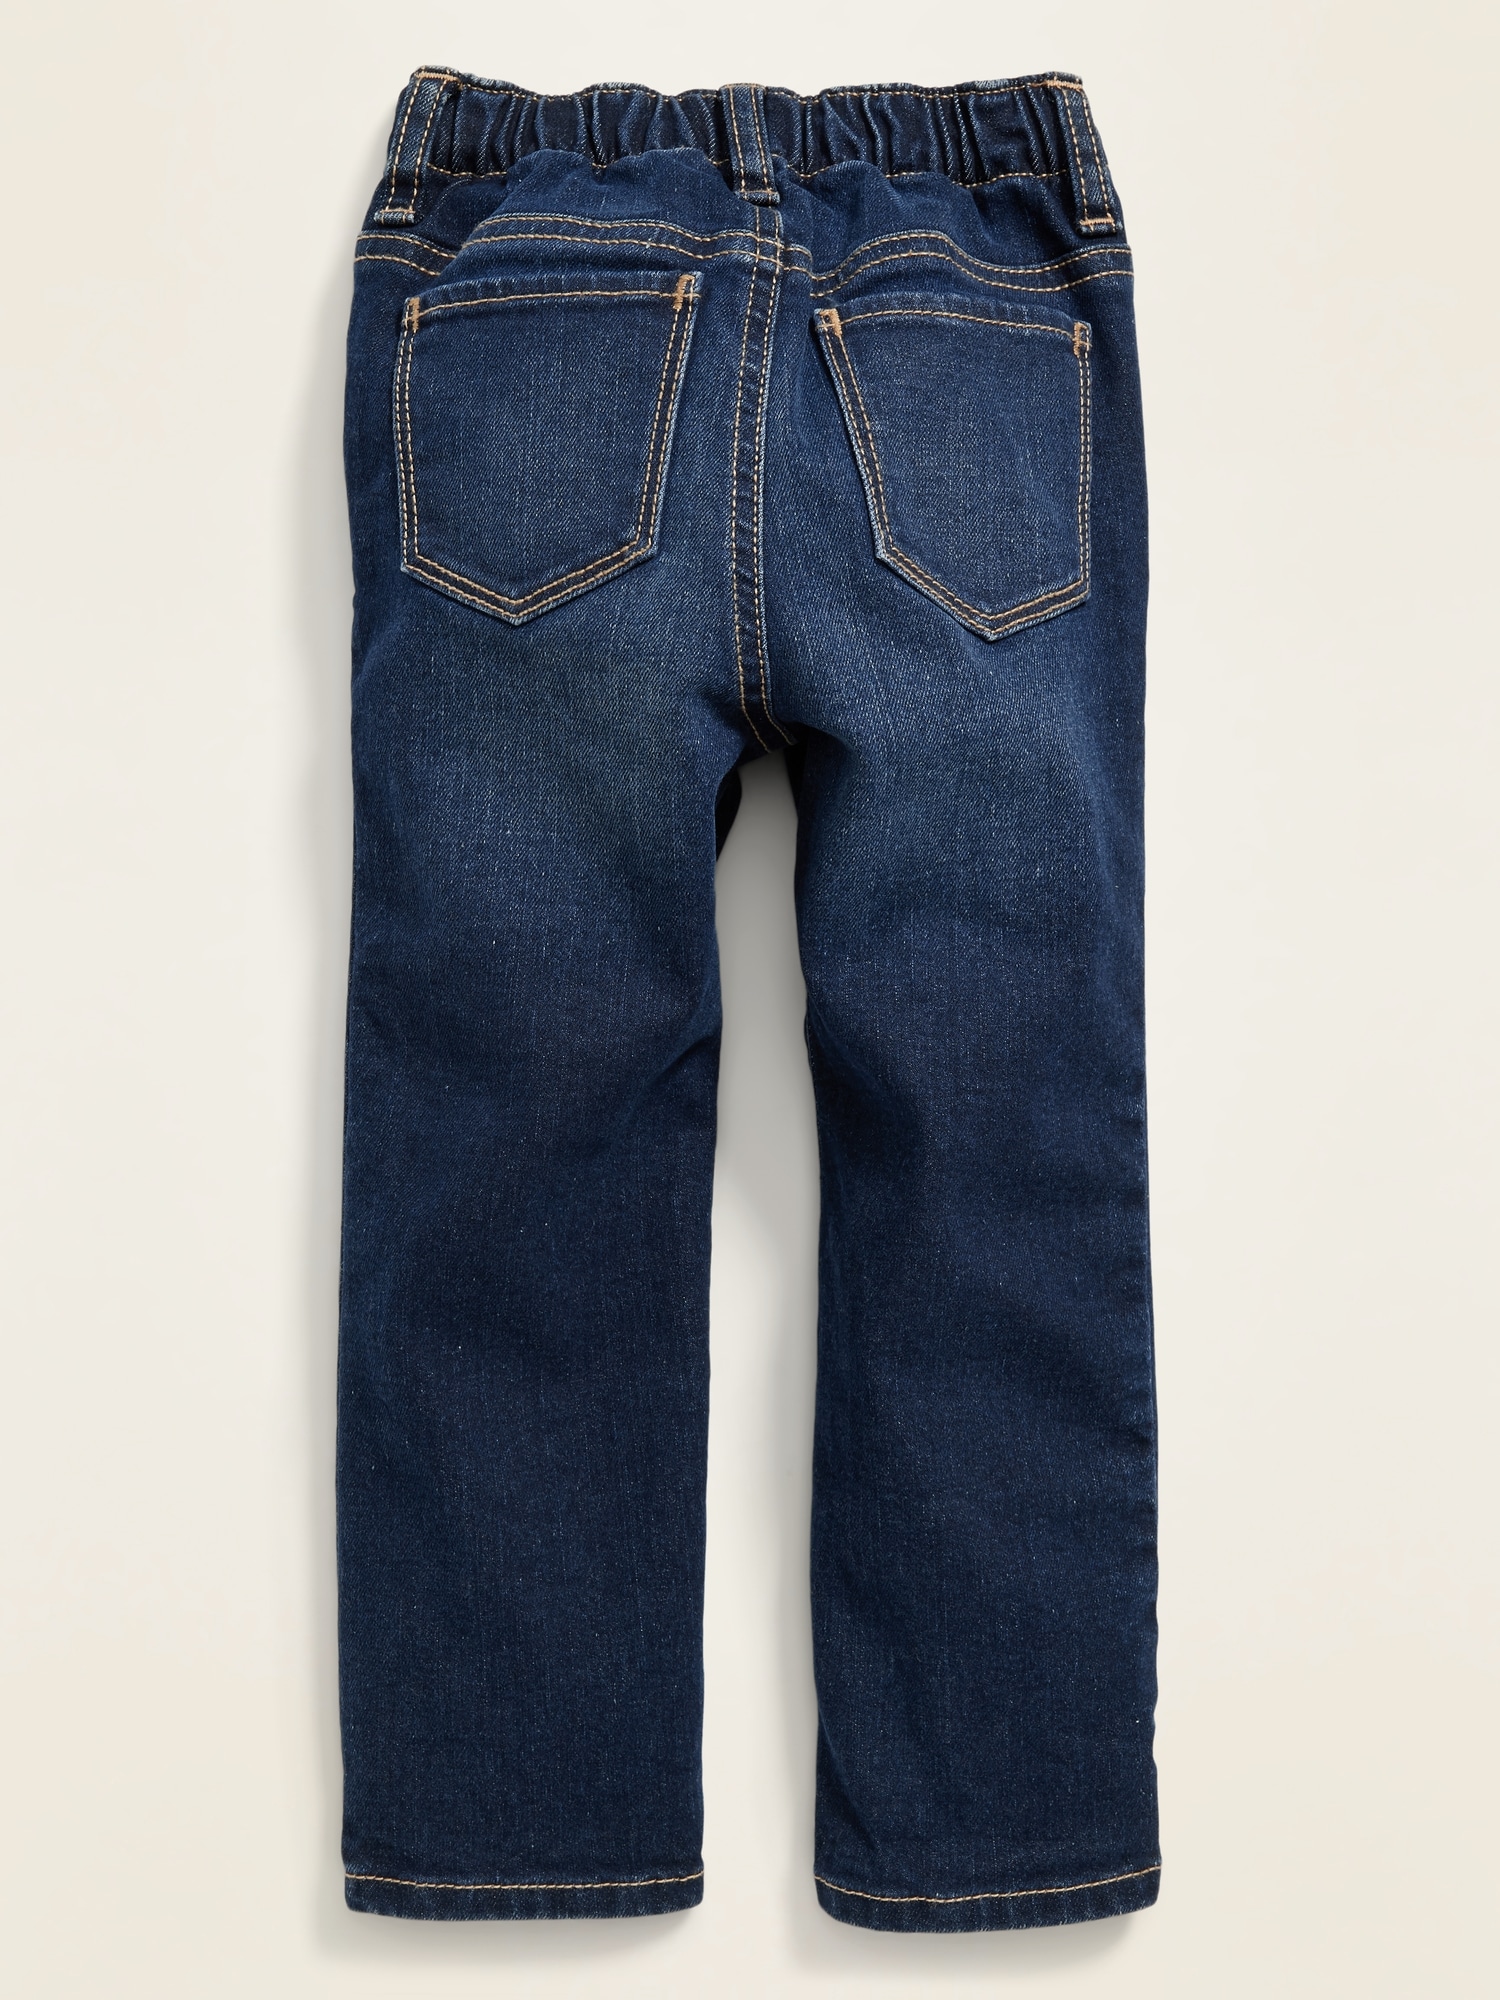 old navy insulated jeans